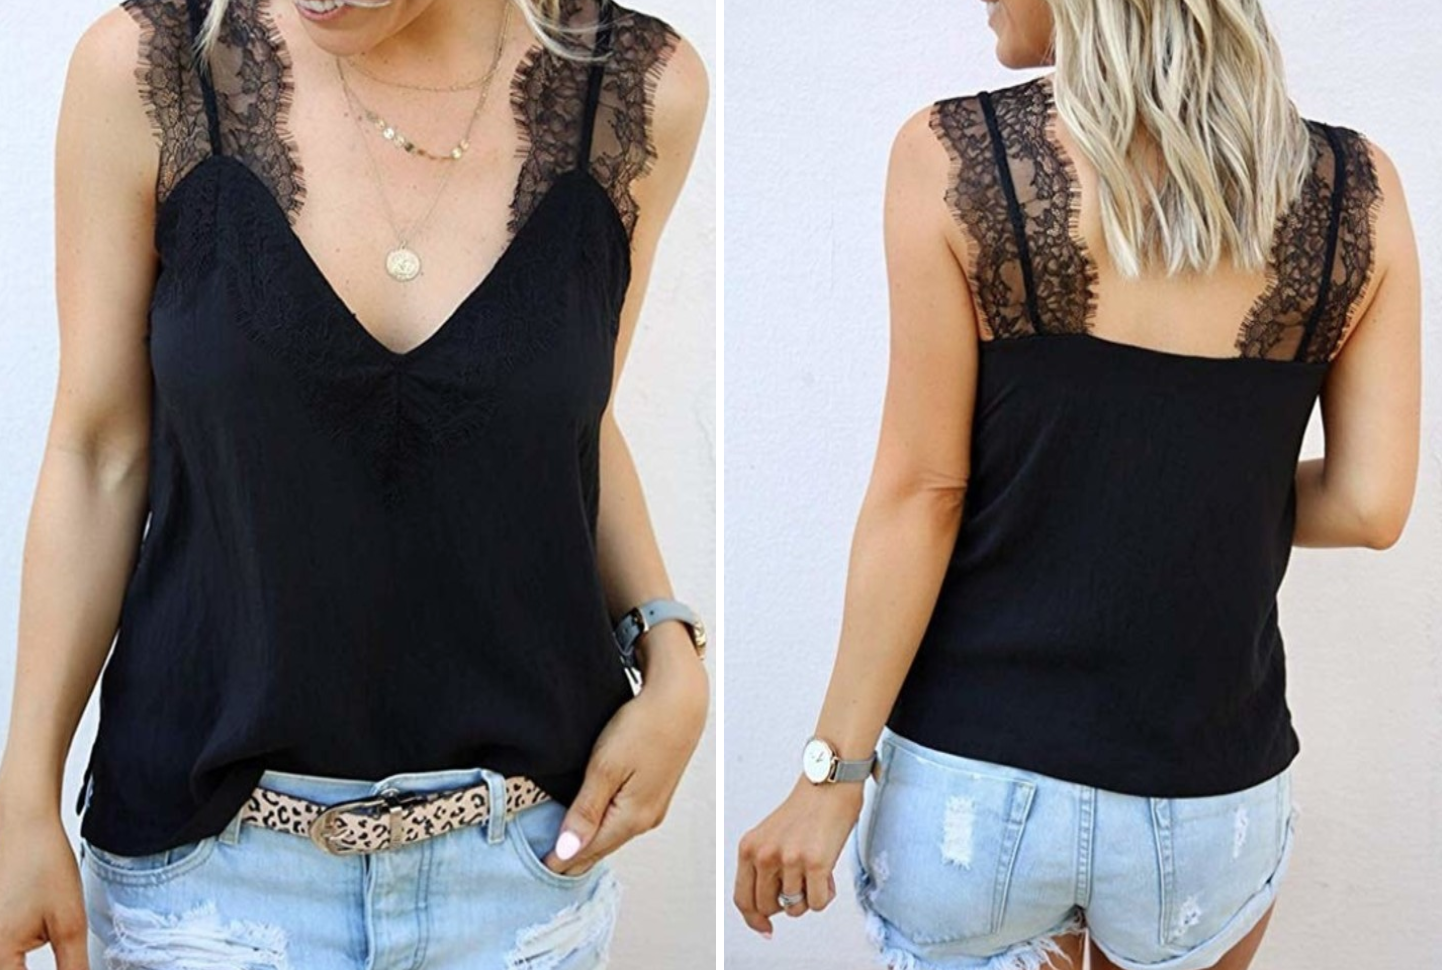 Black v-neck tank with lacy detail straps